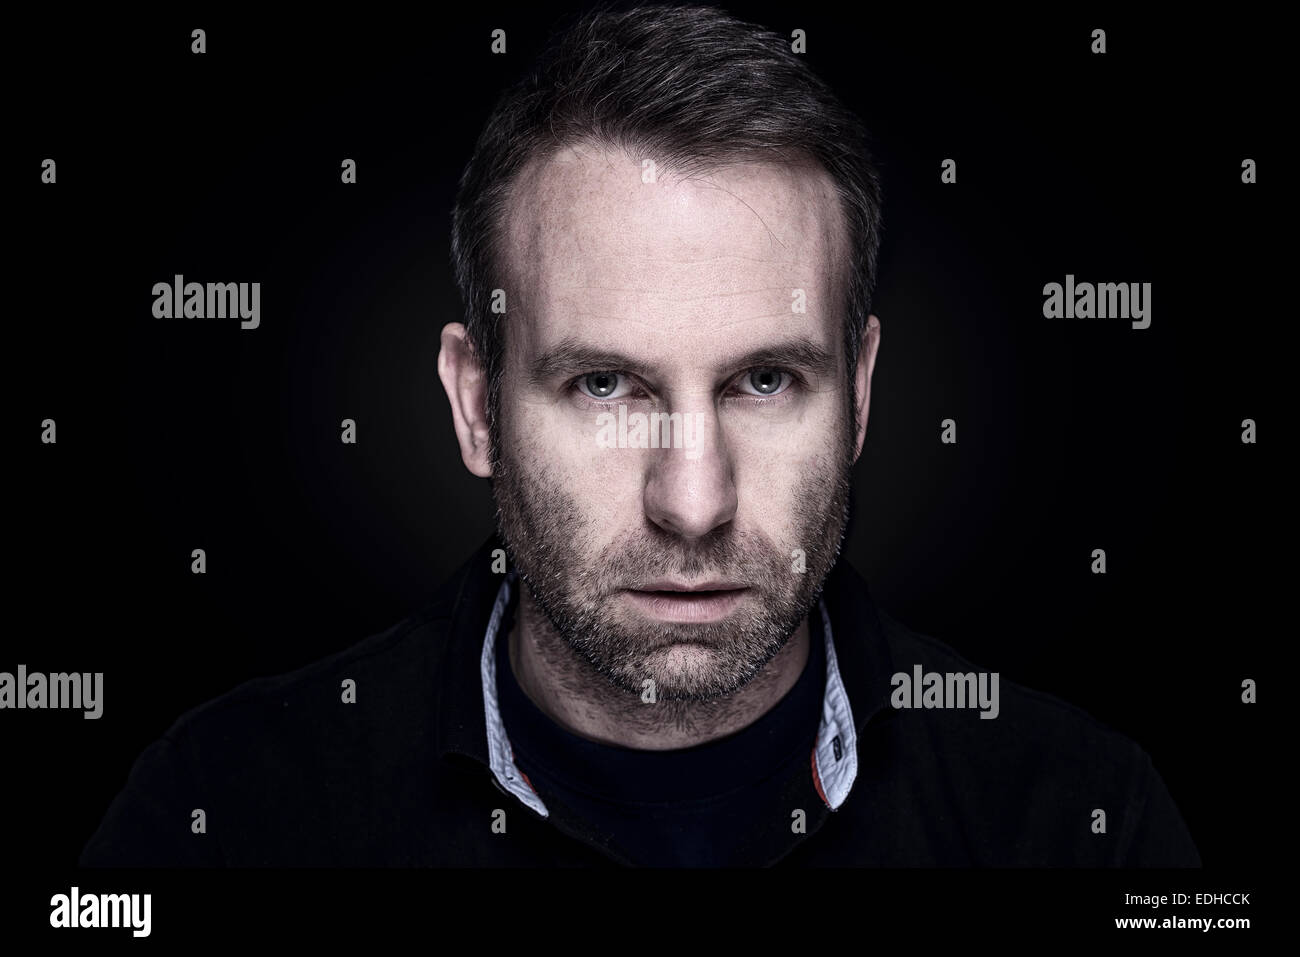 Handsome unshaven middle-aged man with a sombre serious expression looking directly at the camera , dark moody head and shoulder Stock Photo